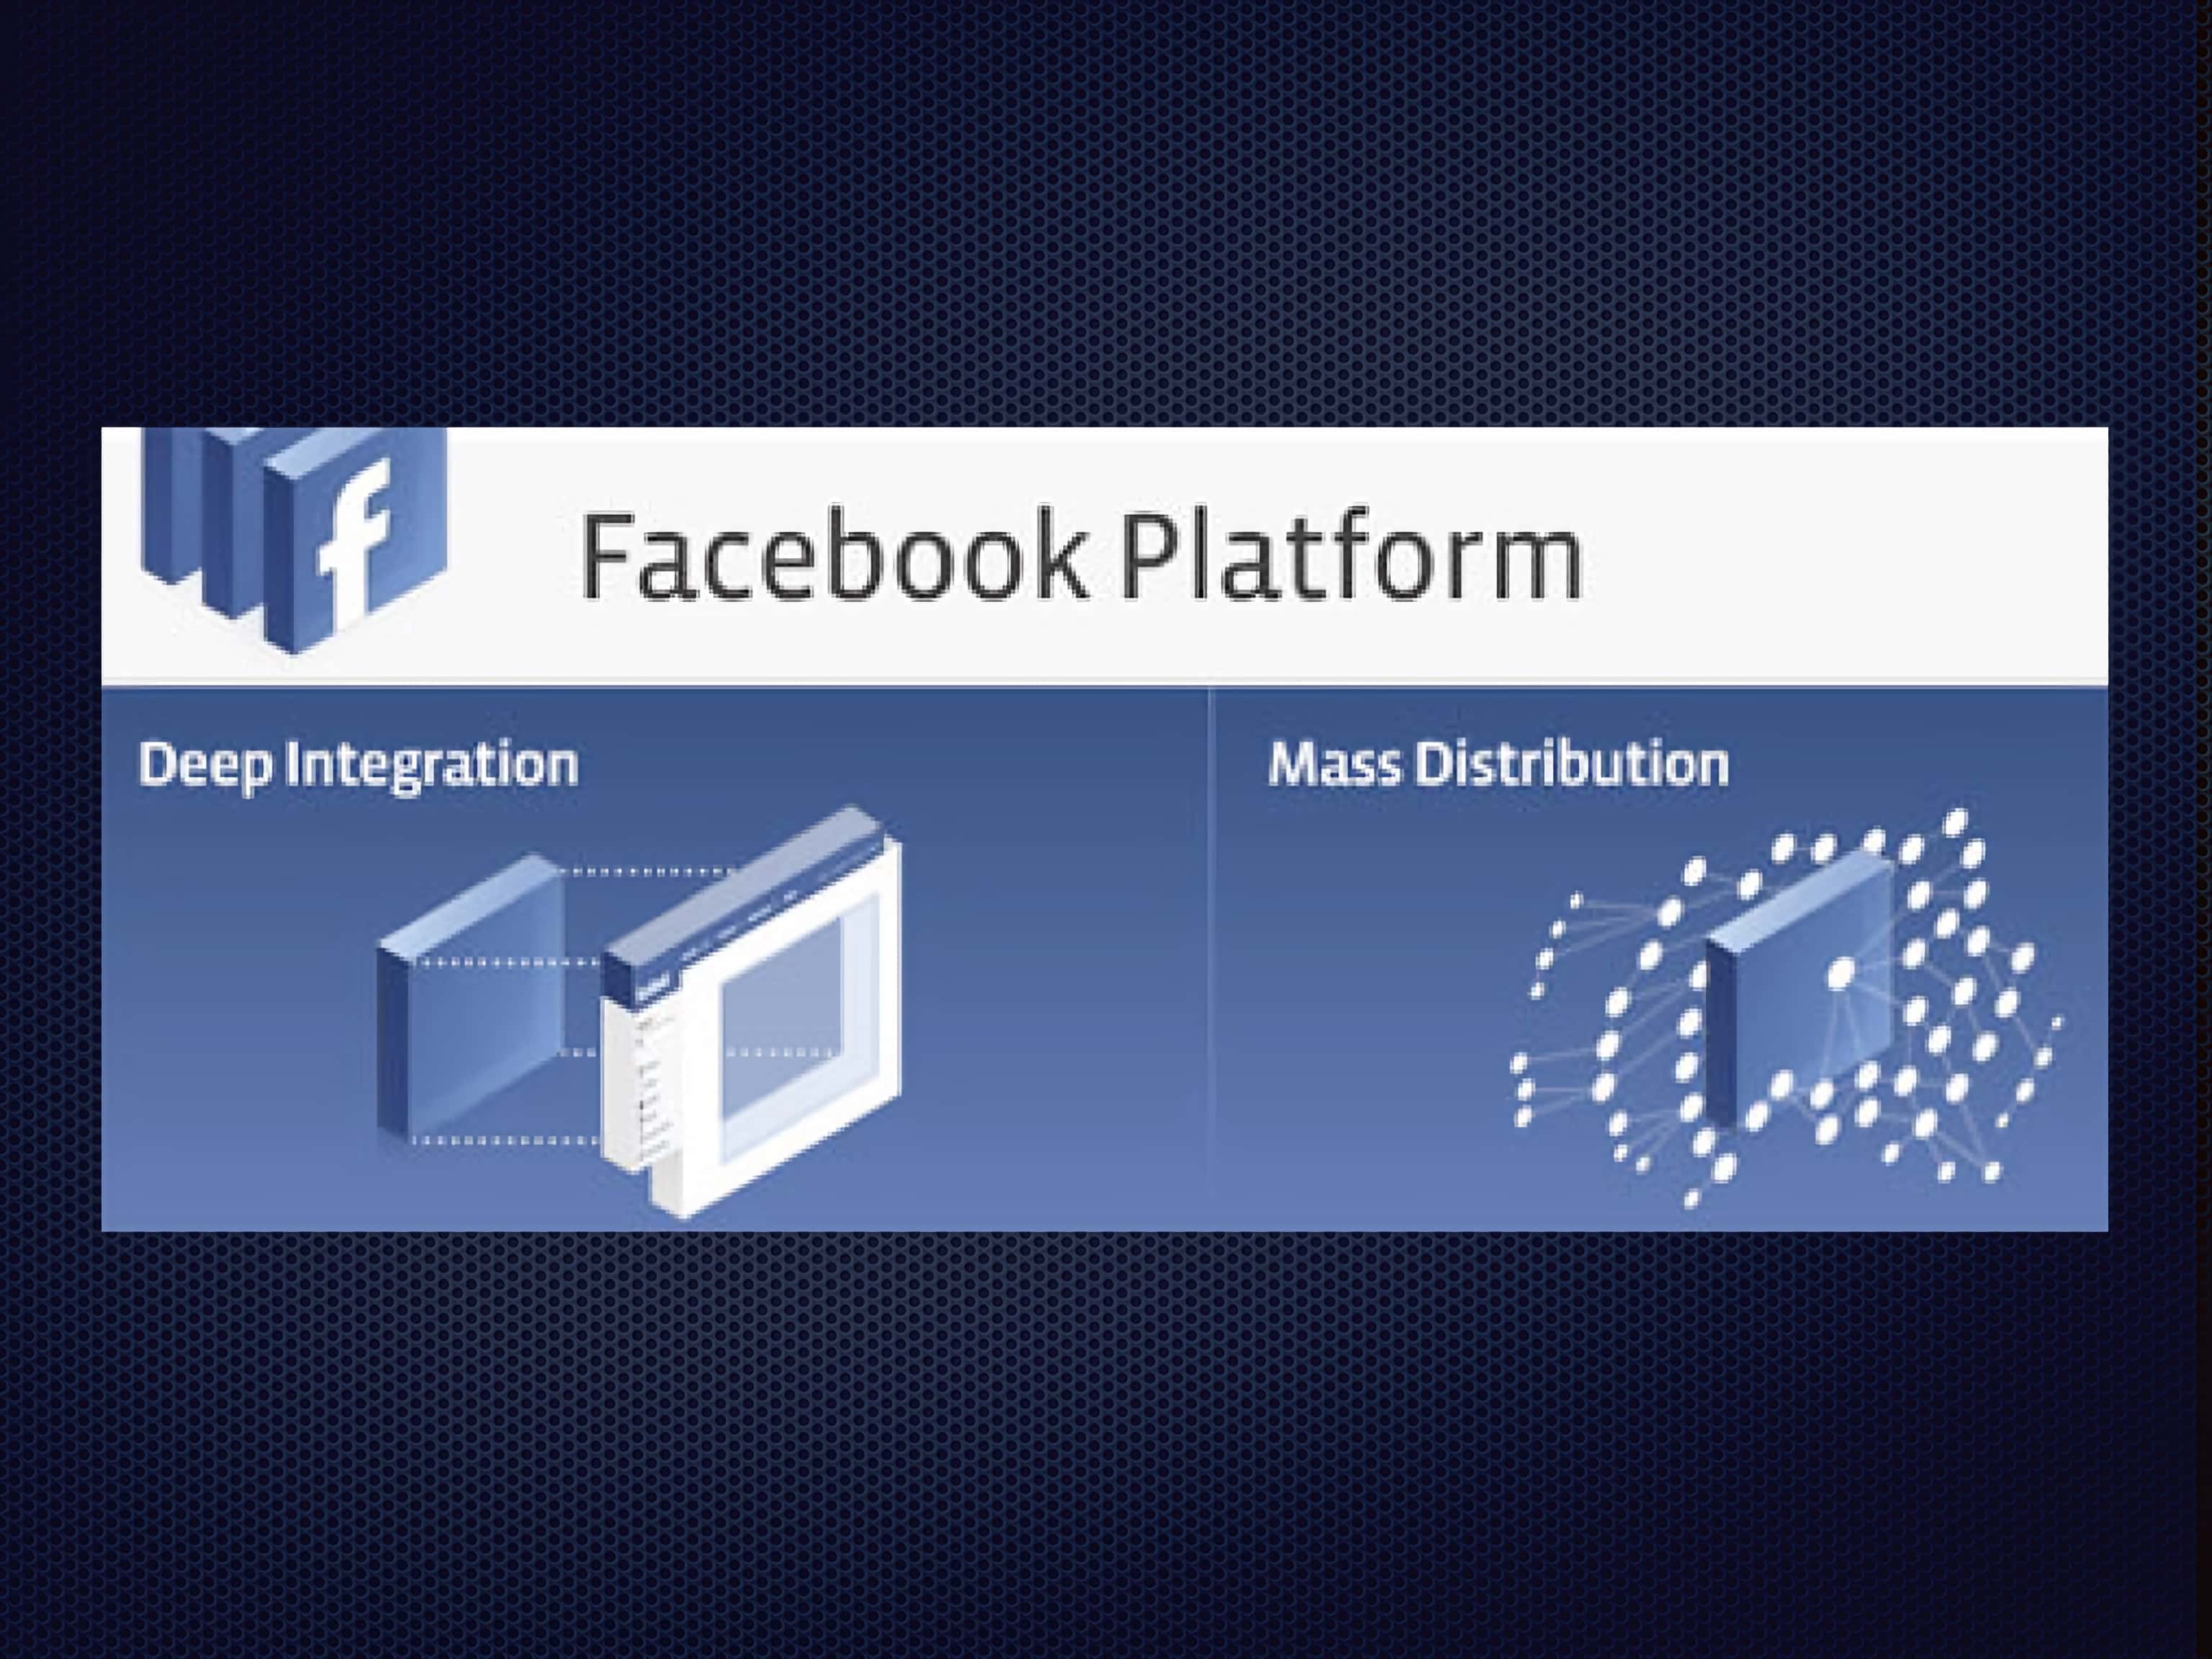 Facebook is expanding to become a true platform, offering identity and services for developers to build their own applications.